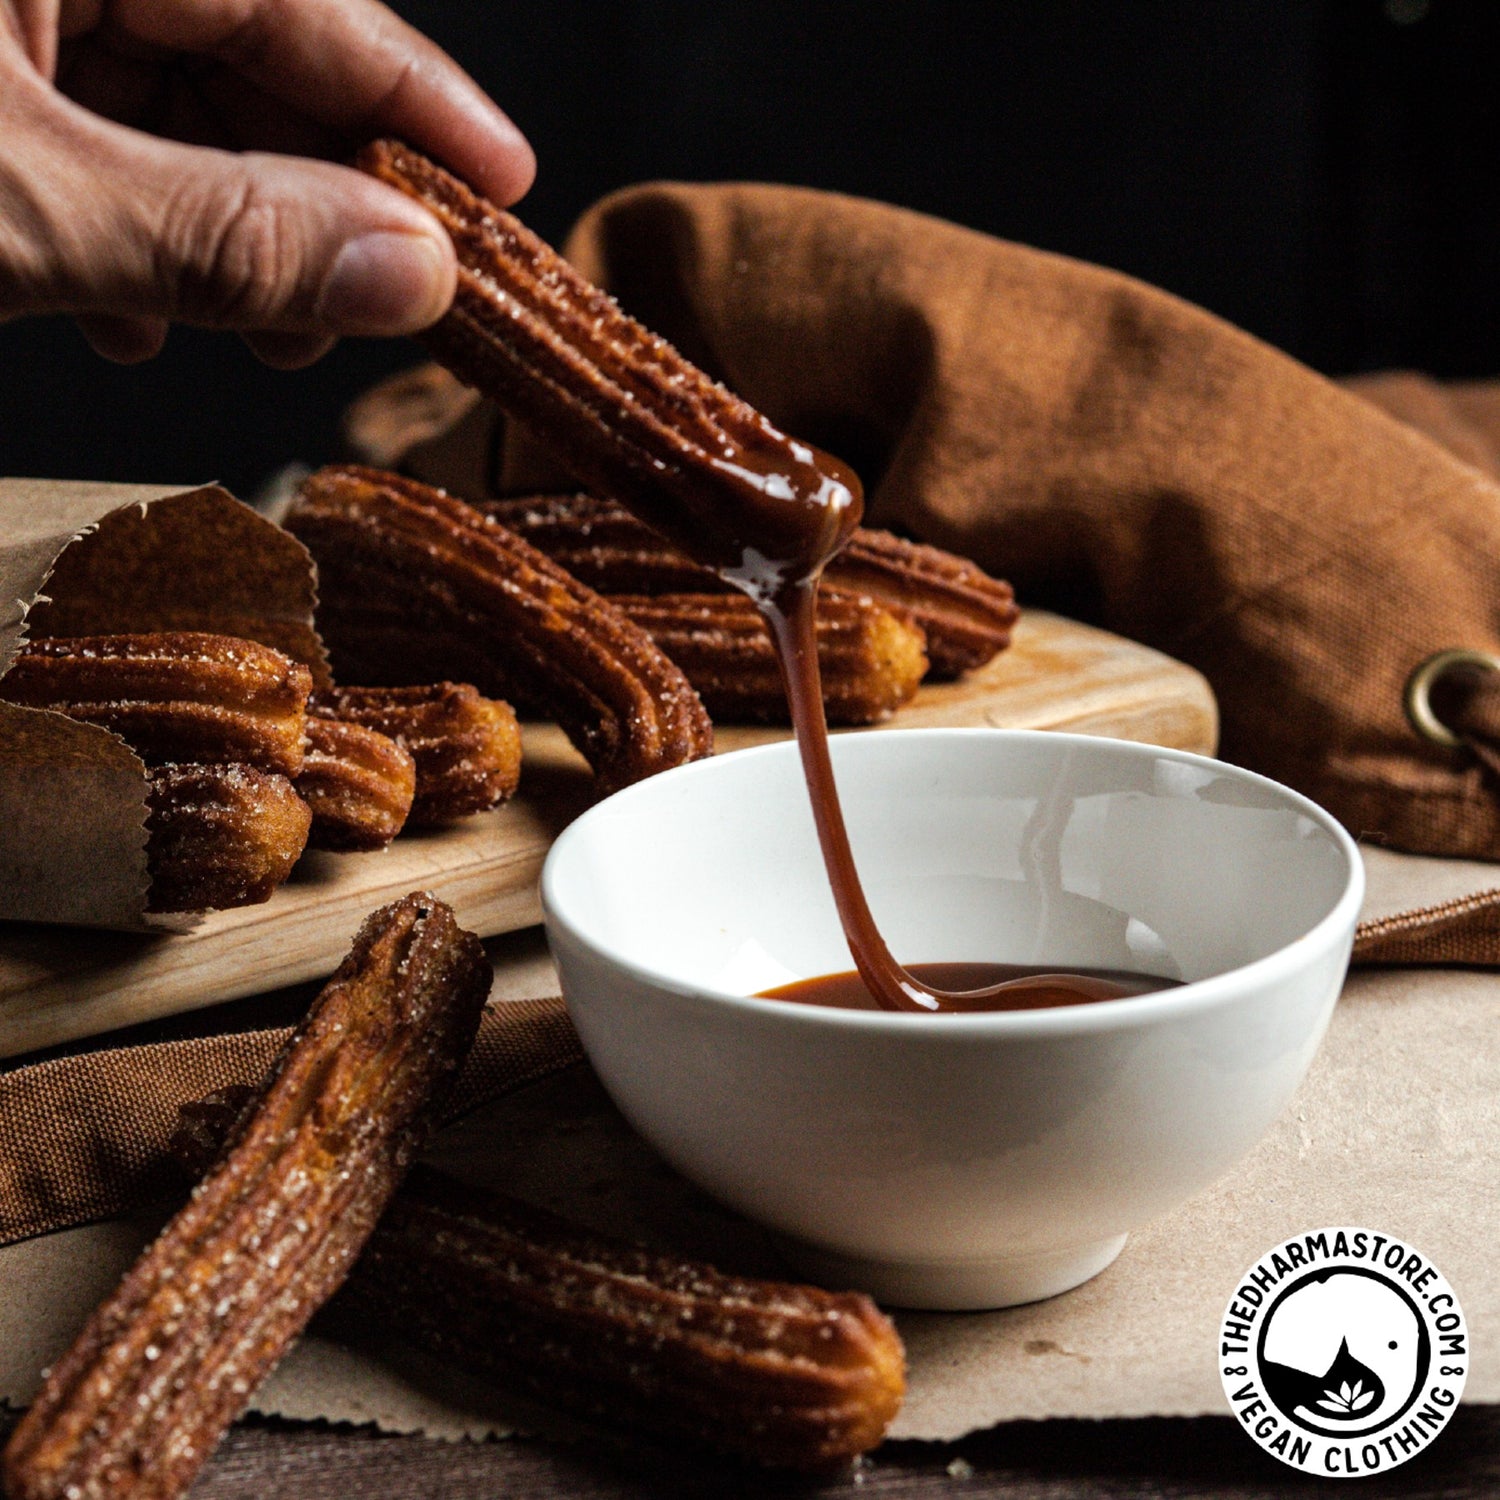 Vegan Churros Recipe: How to Make Delicious and Easy Churros at Home